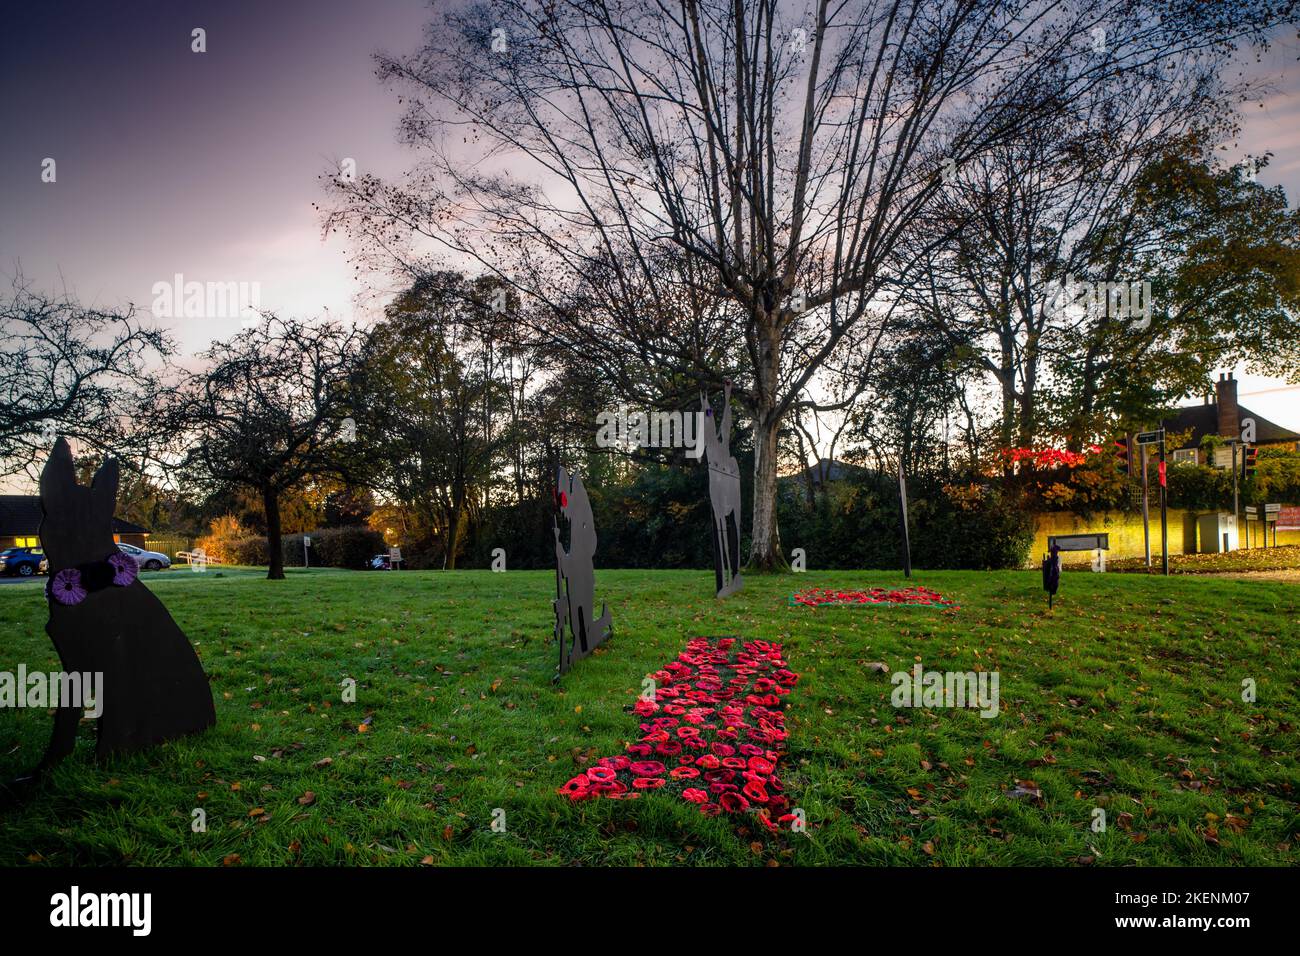 Pembury, Tunbridge Wells, Kent, England. 13 November 2022. Remembrance Day is marked by a collection of poppies and silhouettes of fallen soldiers on Pembury Village Green, shot at dusk  ©Sarah Mott / Alamy Live News. Stock Photo